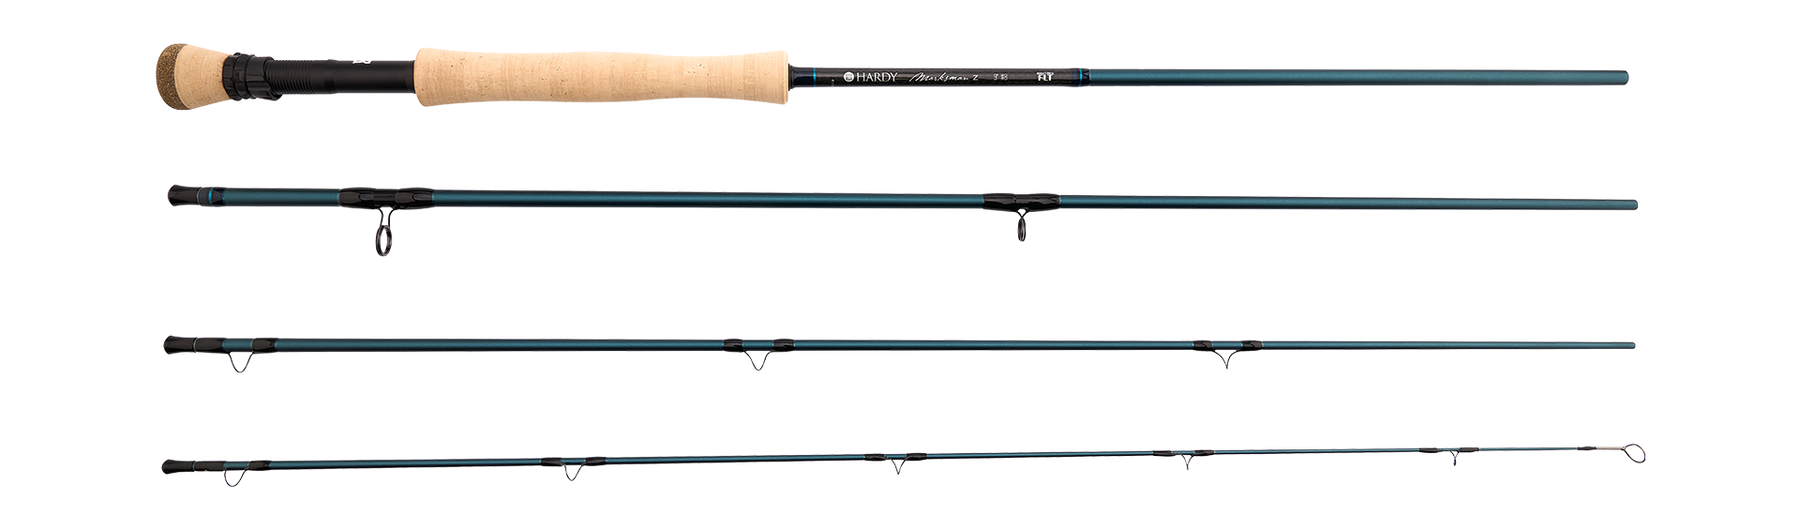 Hardy Releases New Saltwater Rod -- The Marksman Z